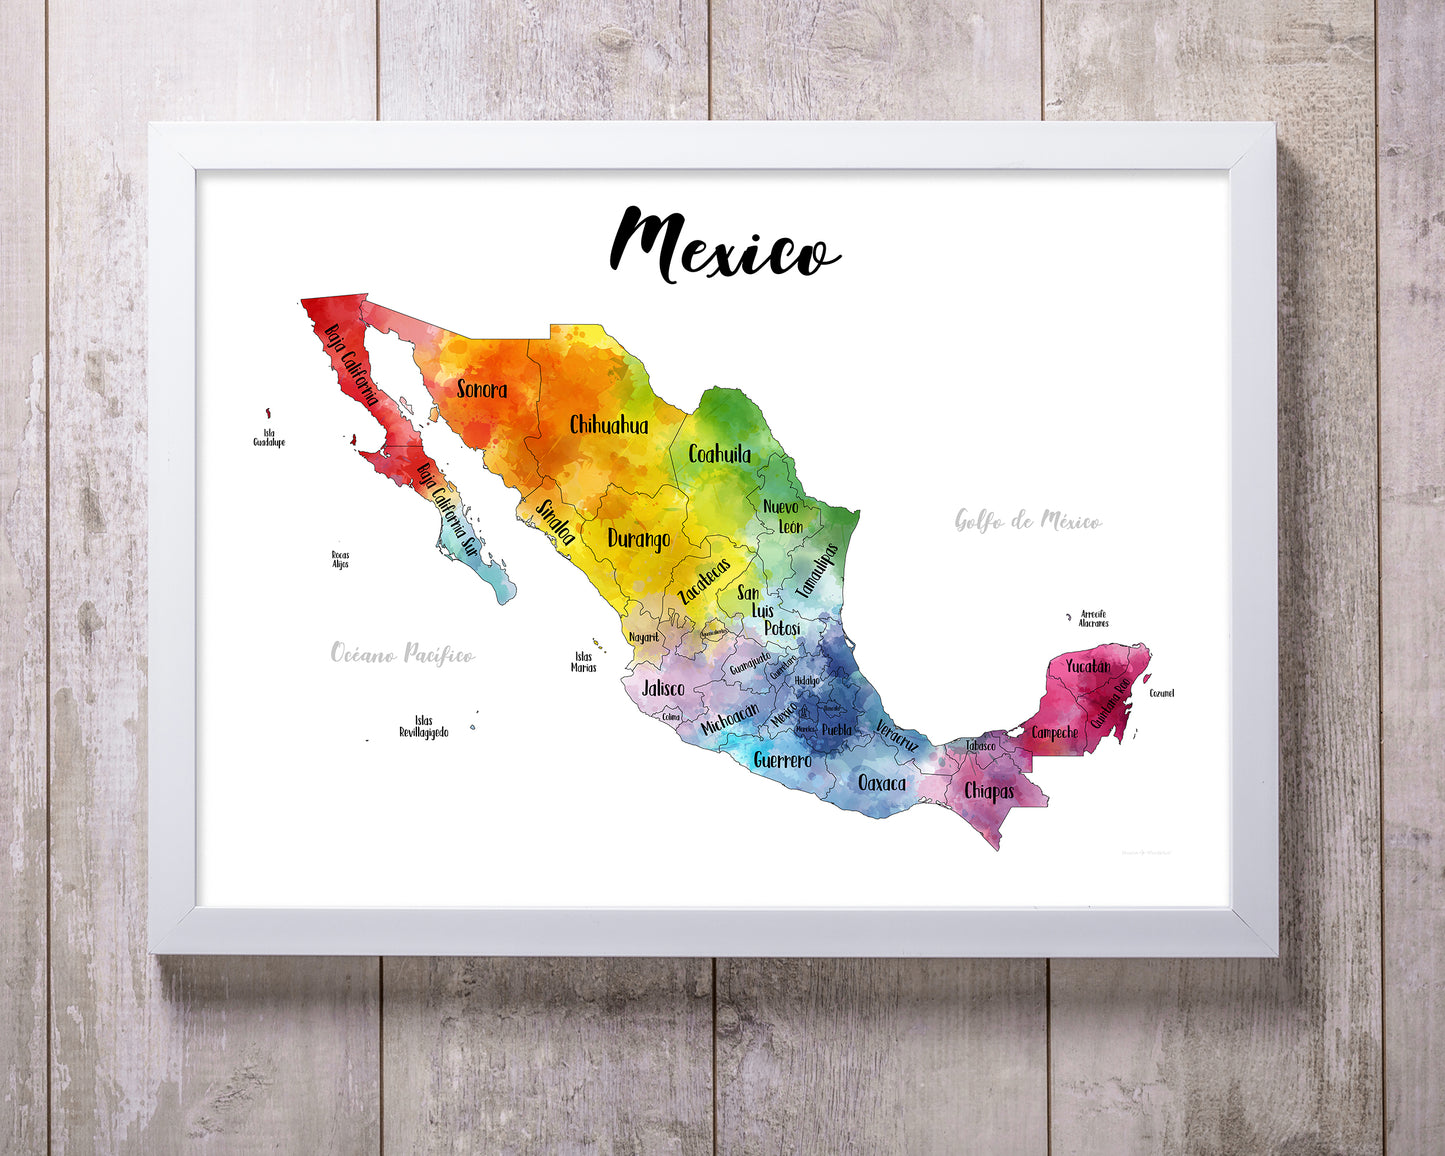 Gold - Mexico Scratch-Off Map - Size 23.5x17"